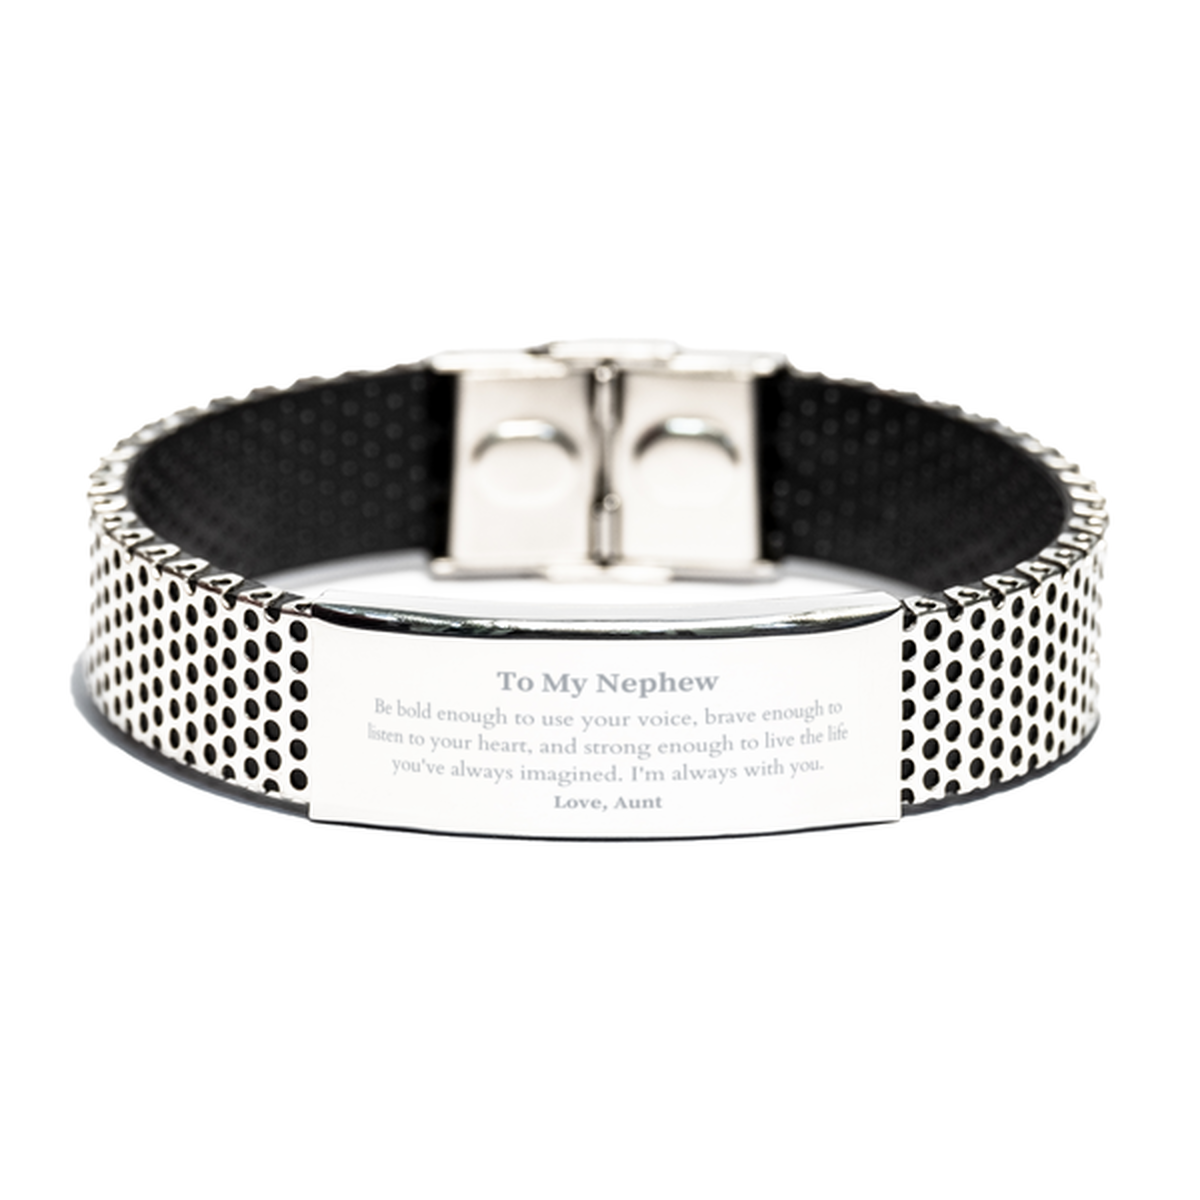 Keepsake Nephew Stainless Steel Bracelet Gift Idea Graduation Christmas Birthday Nephew from Aunt, Nephew Be bold enough to use your voice, brave enough to listen to your heart. Love, Aunt